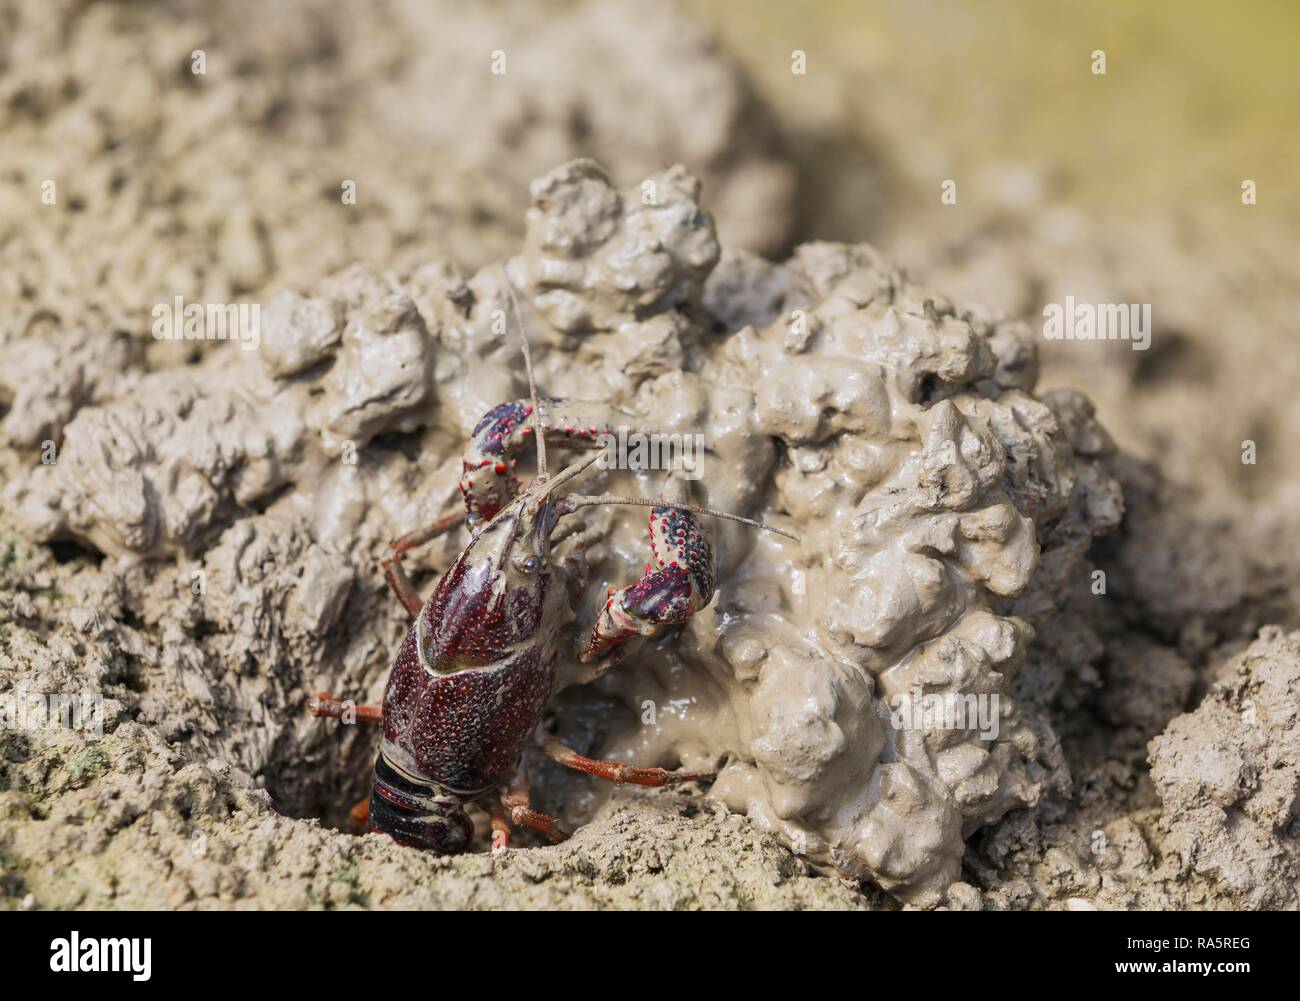 Red Swamp Crayfish (Procambarus clarkii), invasive species from North America, excavating its burrow at the edge of a flooded Stock Photo